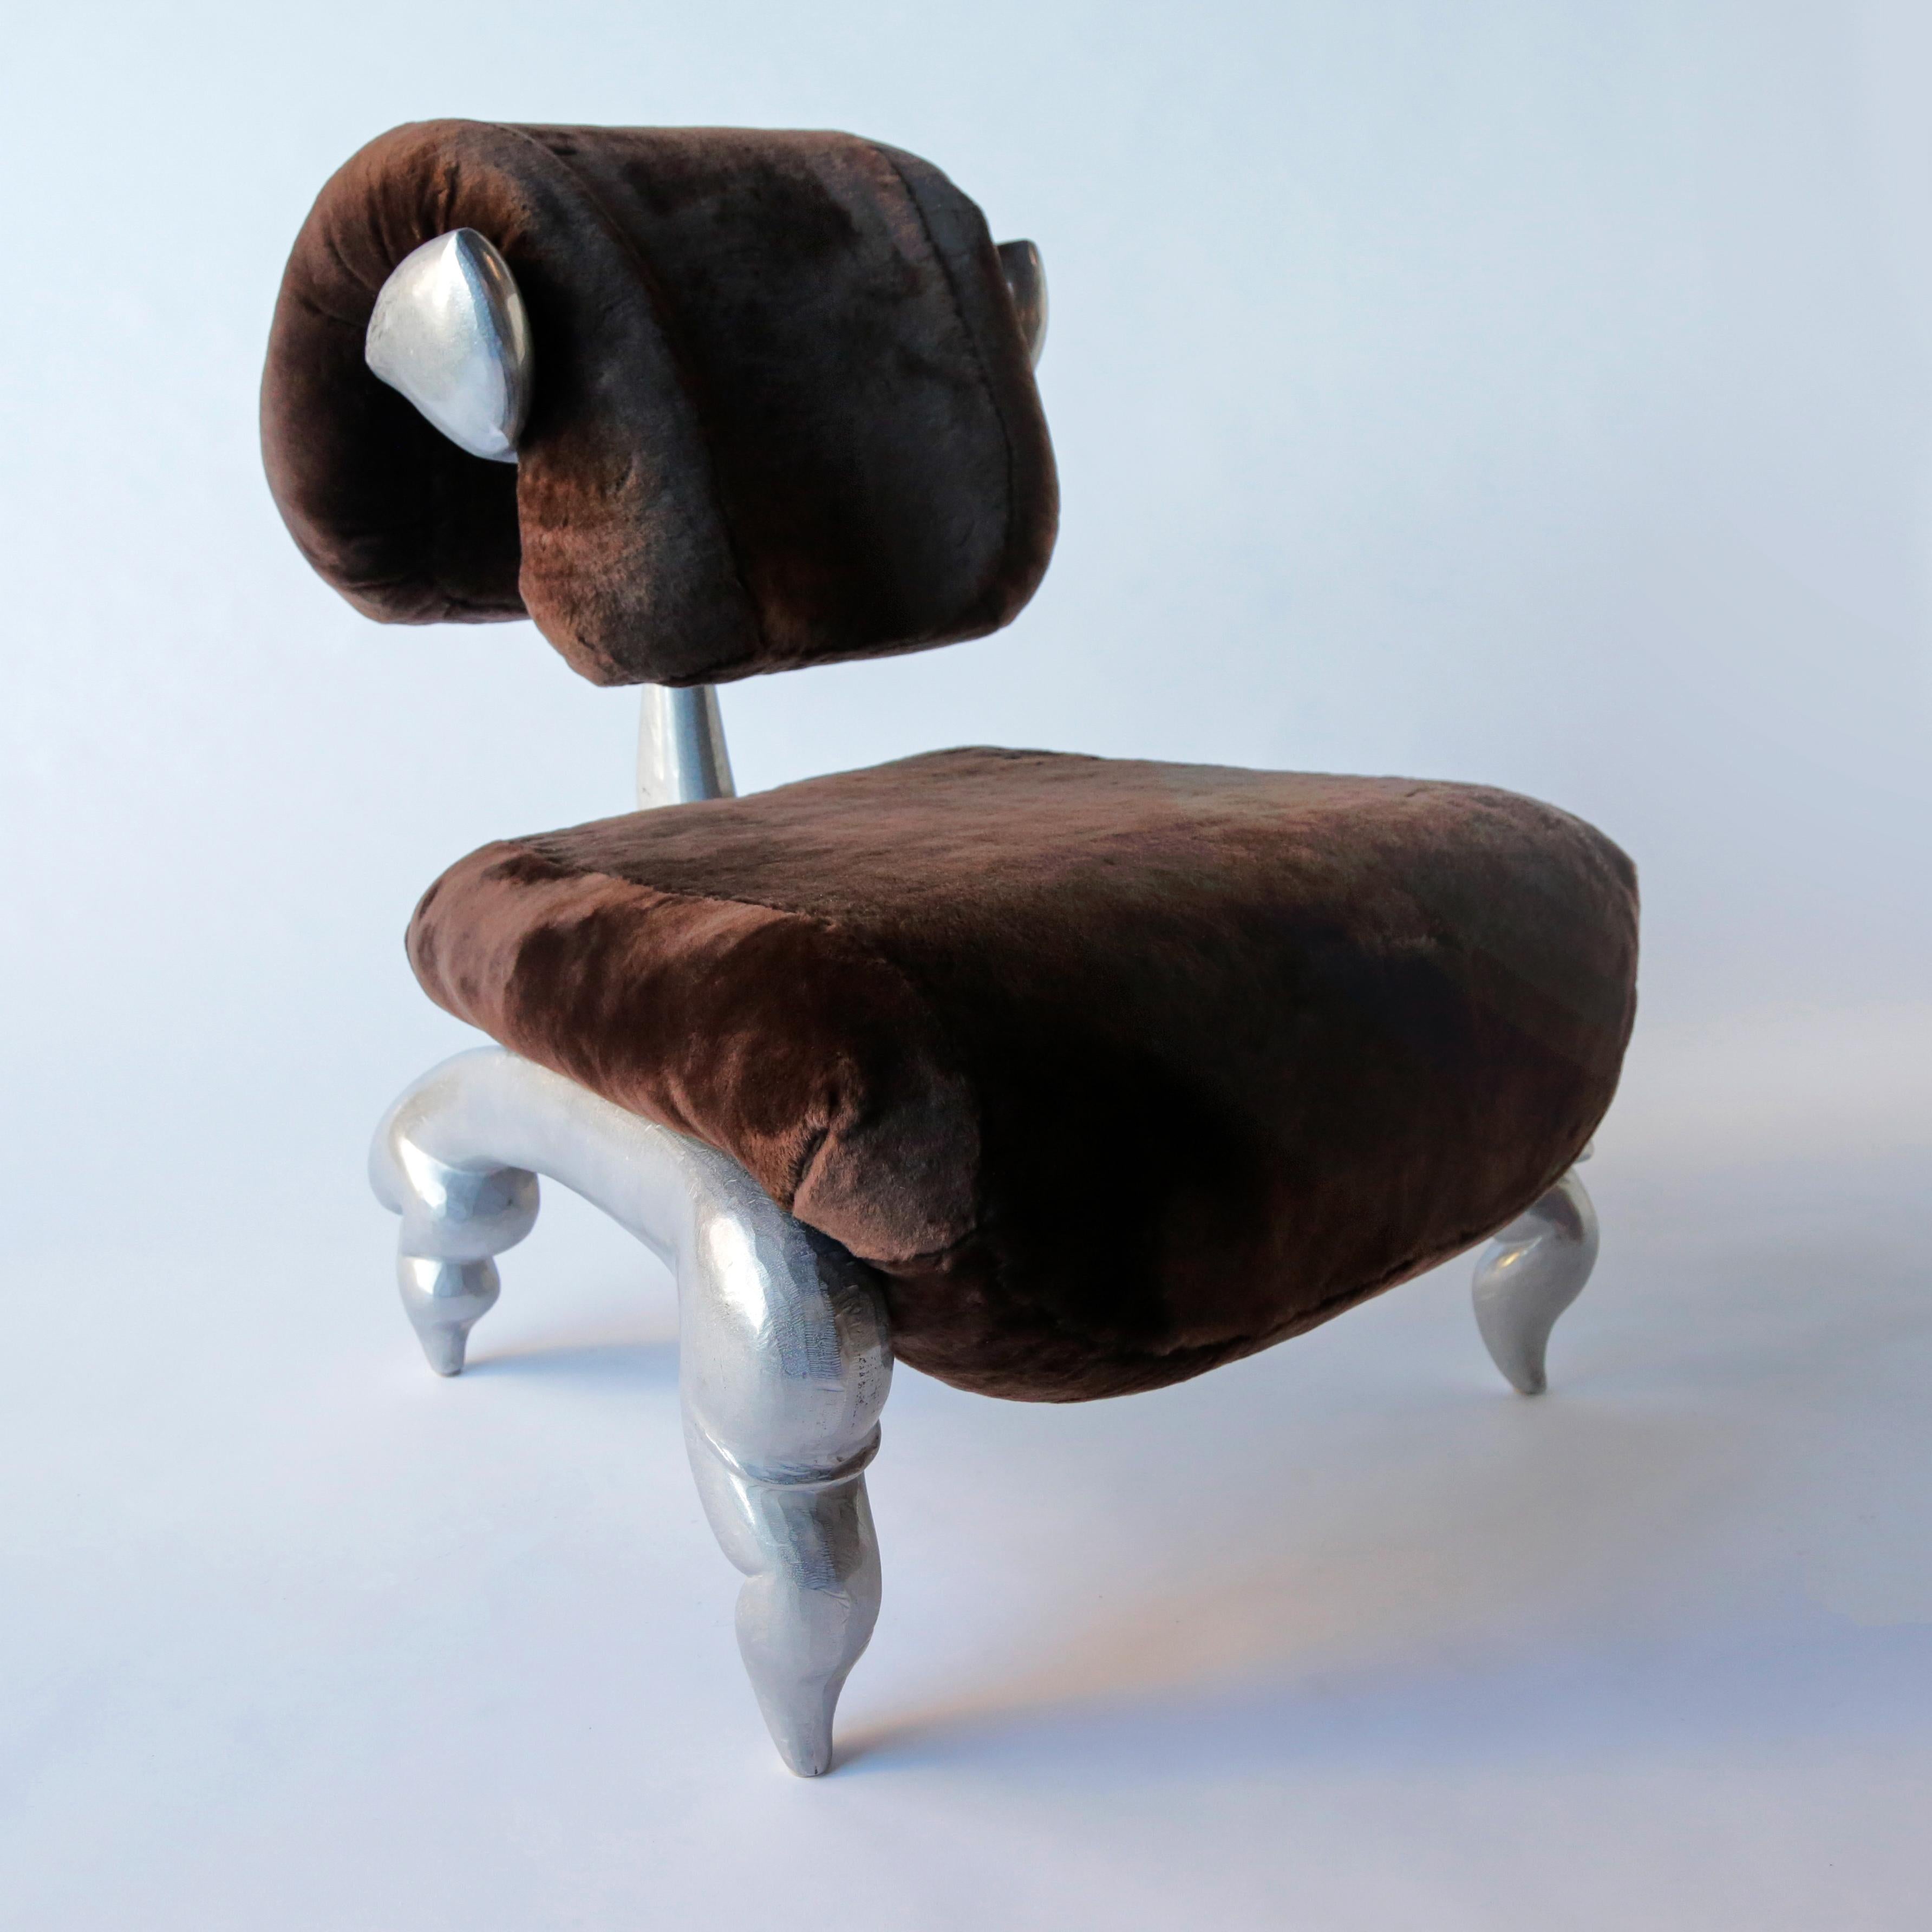 Dolly (Sheep) lounge chair, cast and hand worked burnished recycled aluminum, shearling, Jordan Mozer, Chicago, 2018 
Provenance: Collection of the artist. Signed.
Measurements; 31 